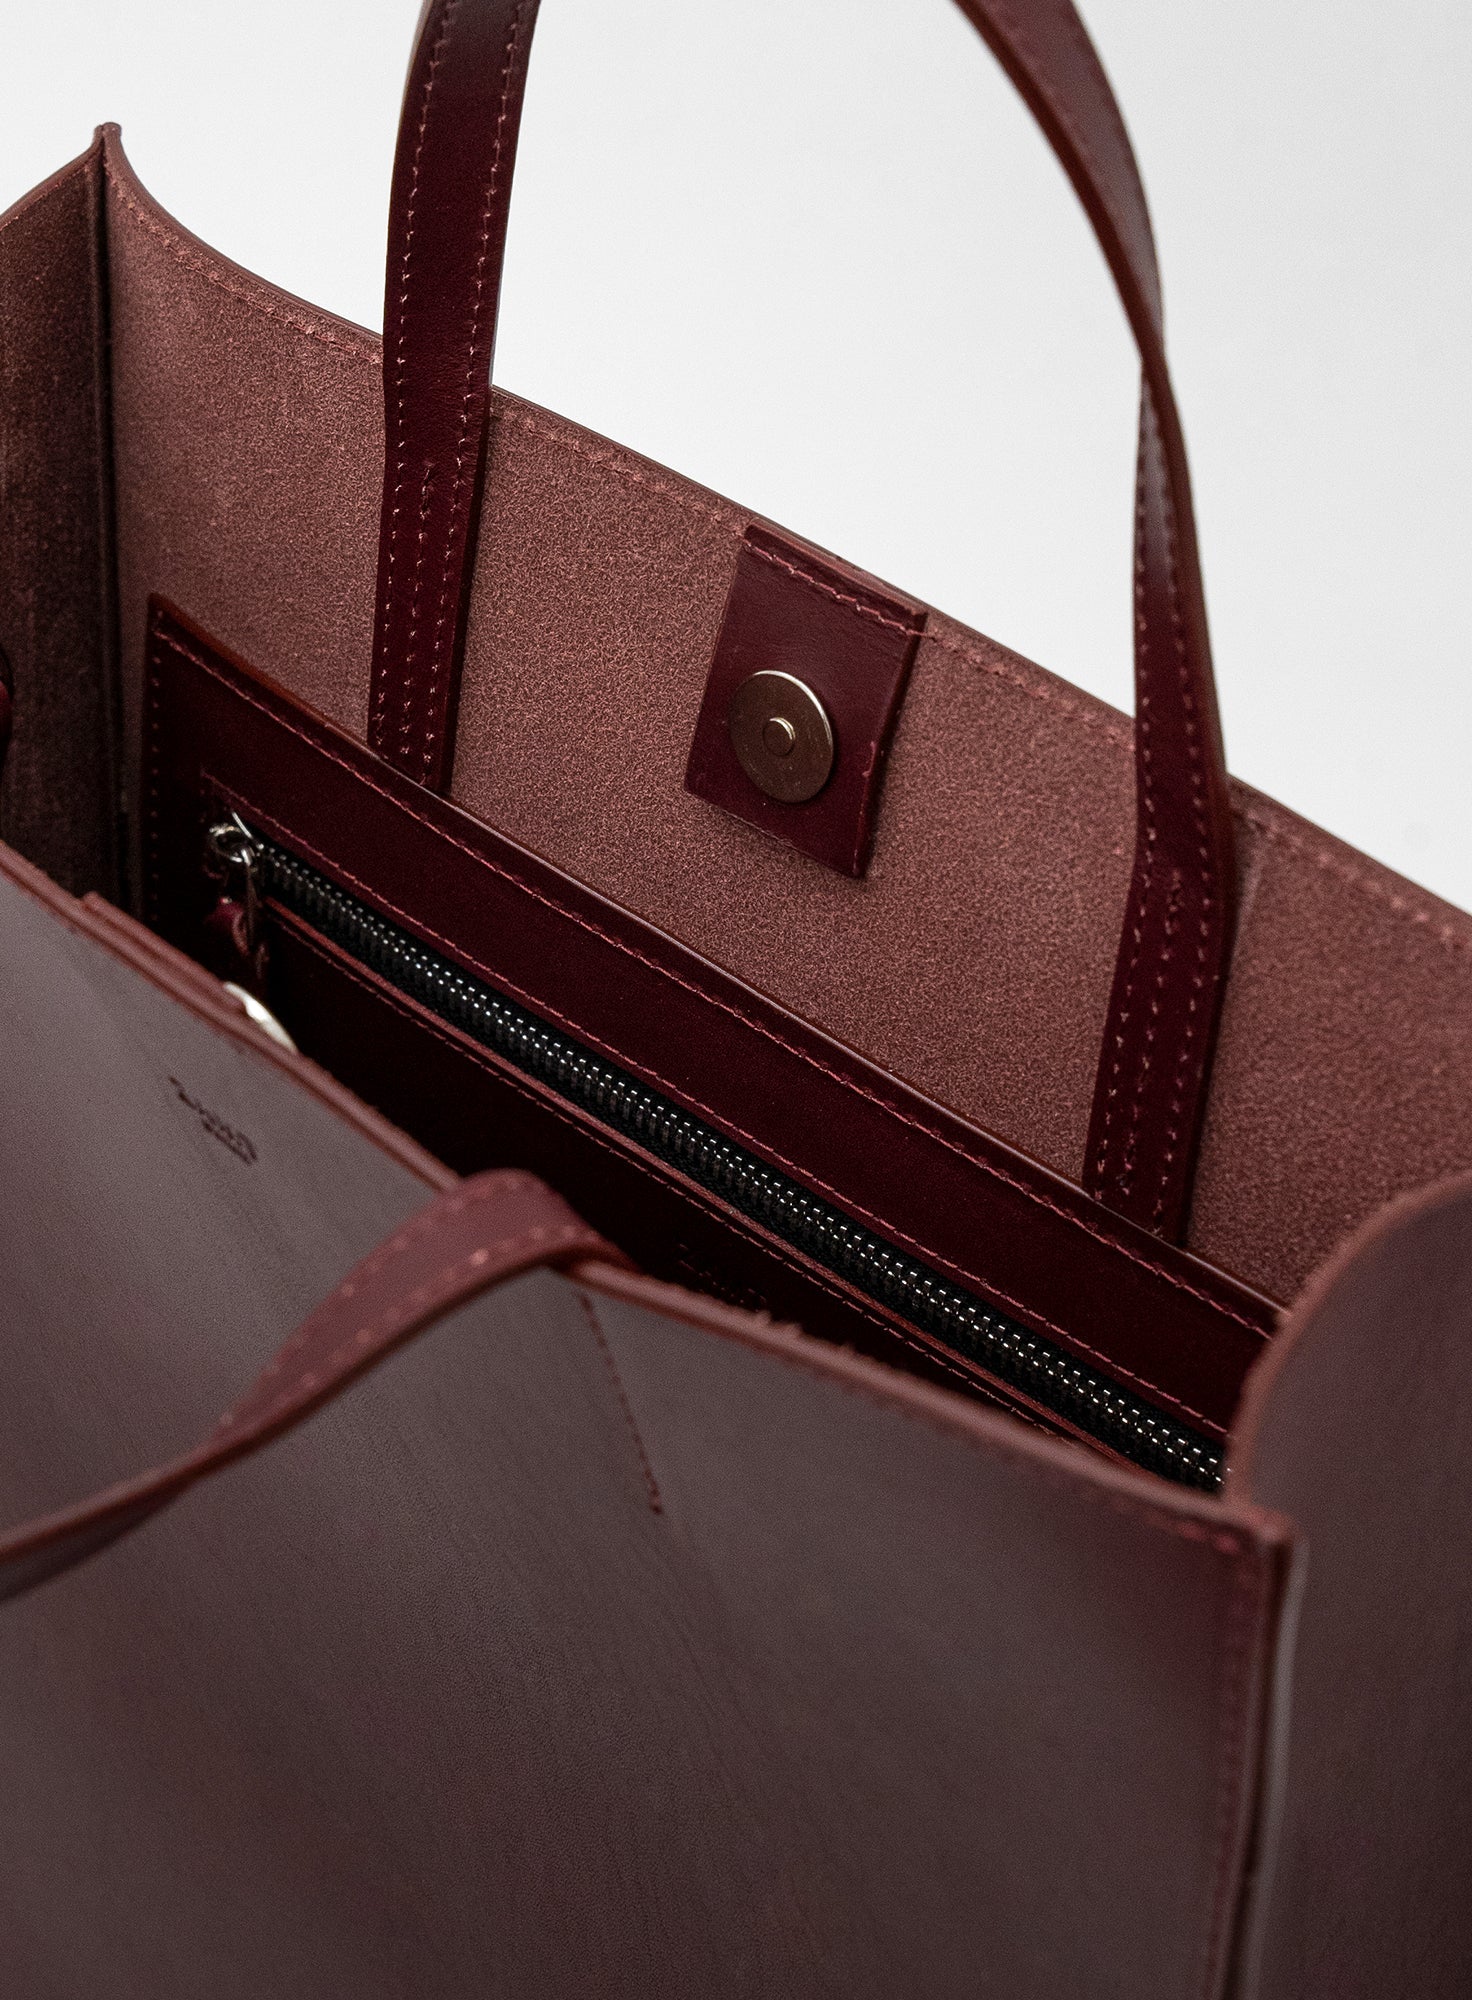 CONTAINER_BAG_FINCH_BORDEAUX_Designed_in_Berlin_Made_to_last_Handmade_in_Poland.